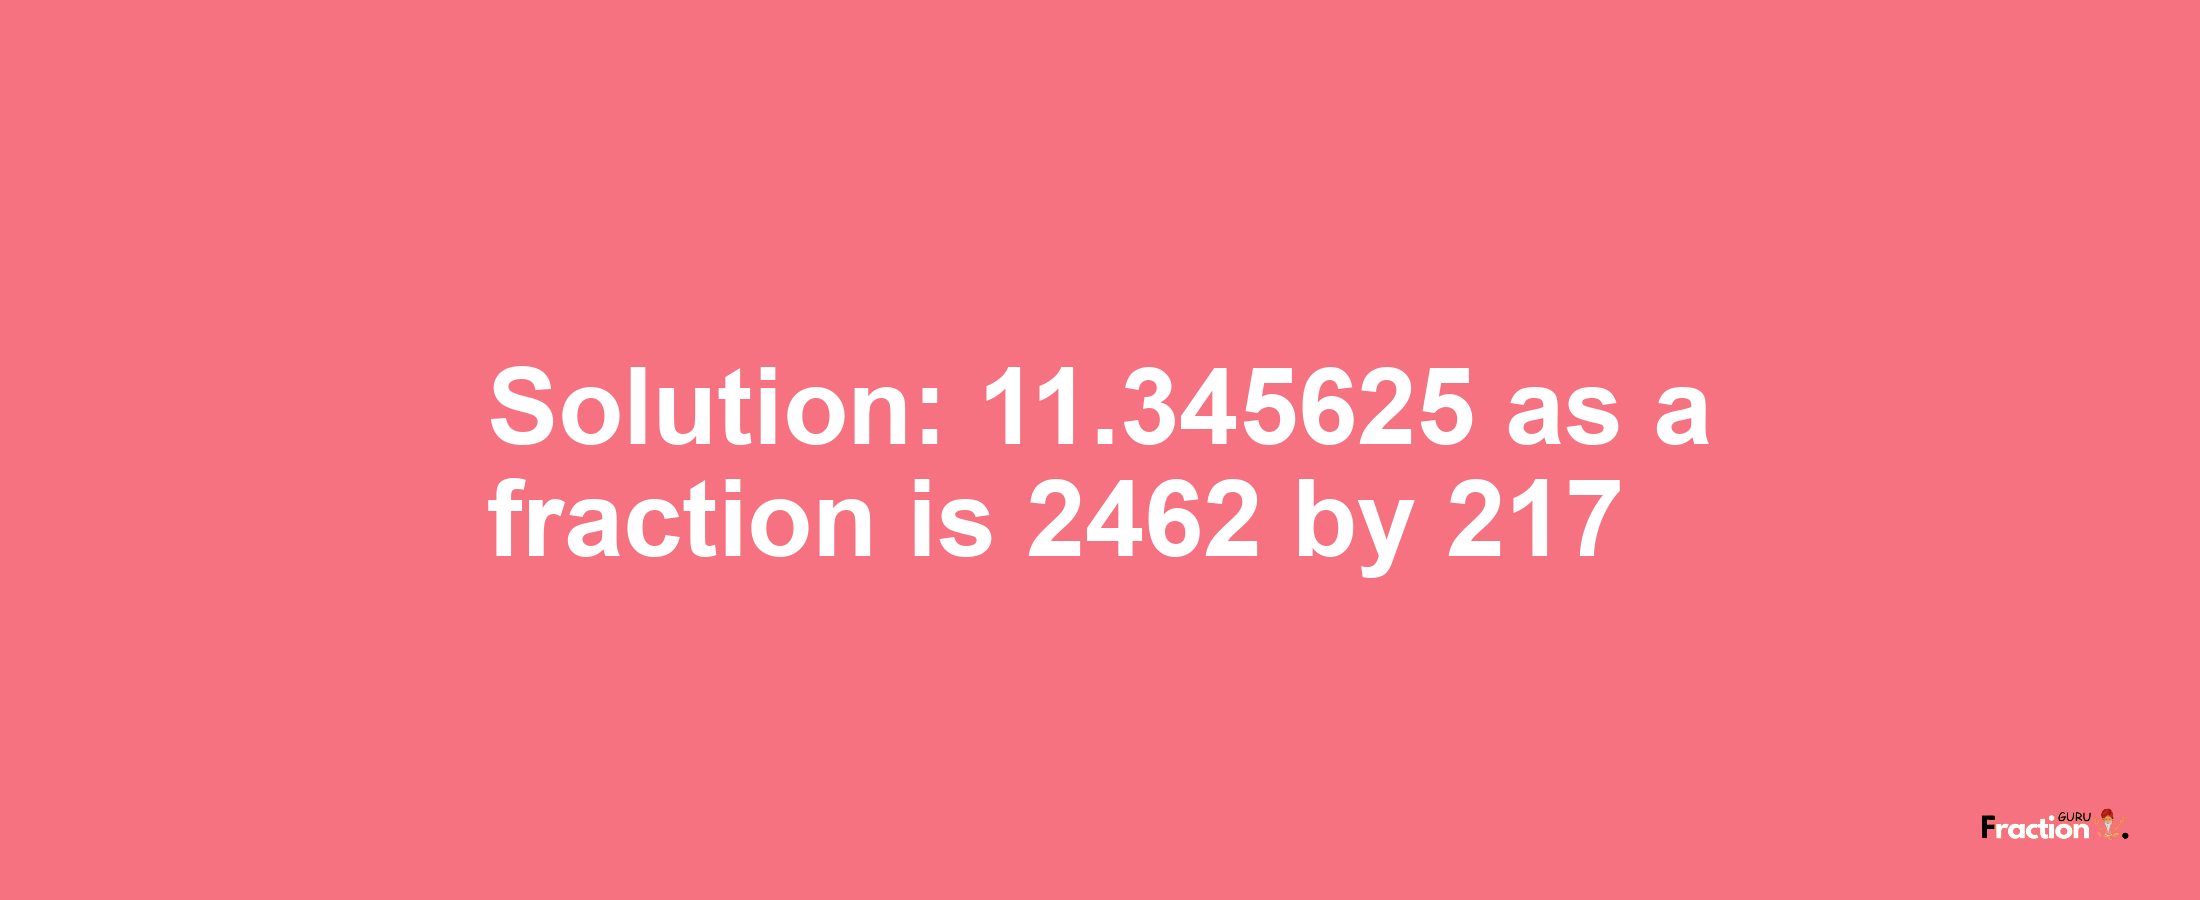 Solution:11.345625 as a fraction is 2462/217